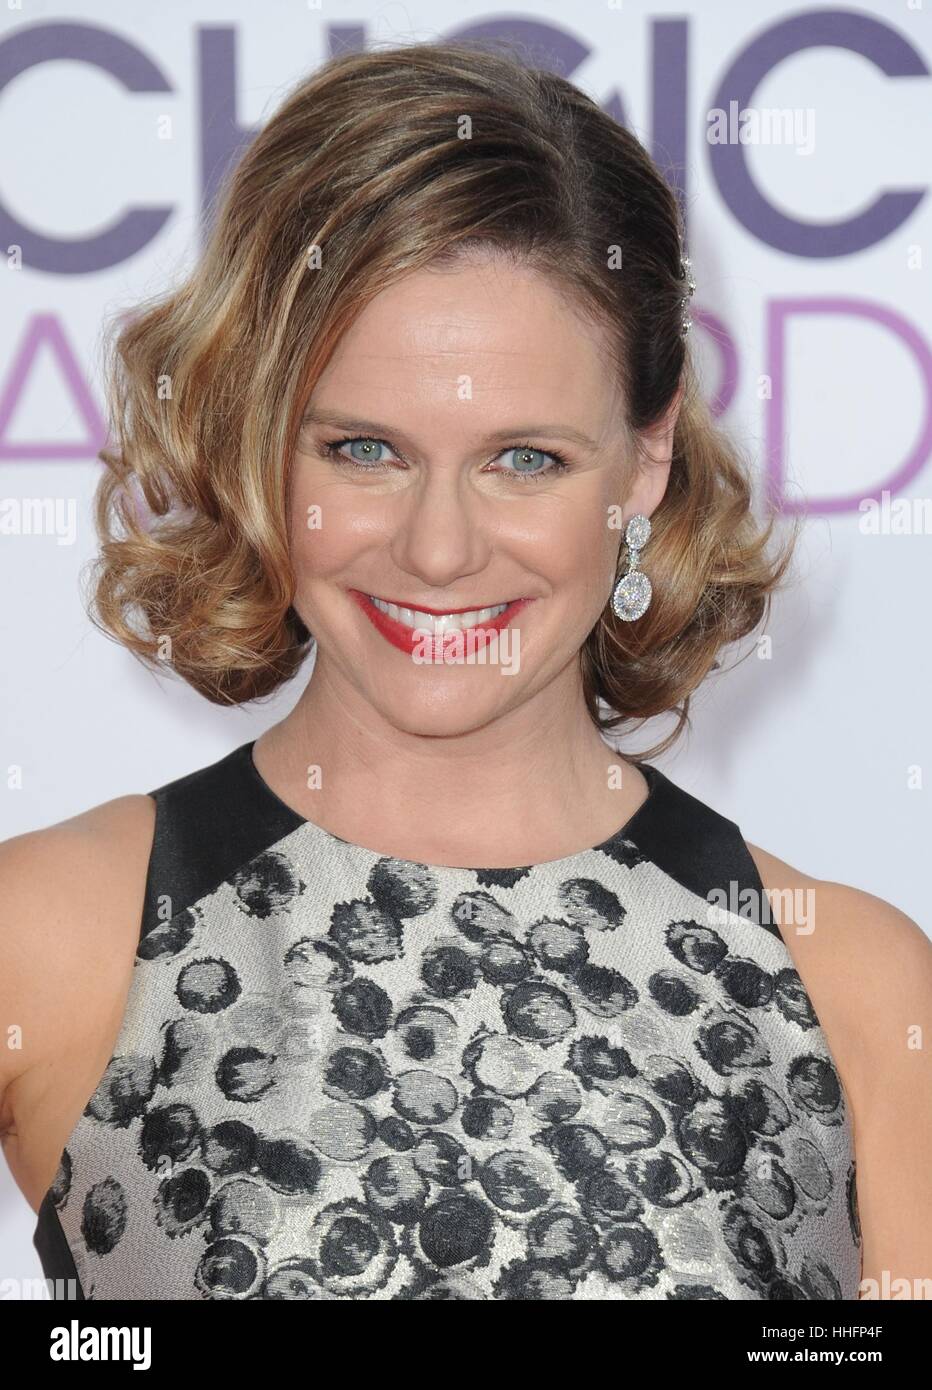 Los Angeles, CA, USA. 18th Jan, 2017. Andrea Barber at arrivals for People's Choice Awards 2017 at the Microsoft Theatre L.A. Live. Credit: Dee Cercone/Everett Collection/Alamy Live News Stock Photo